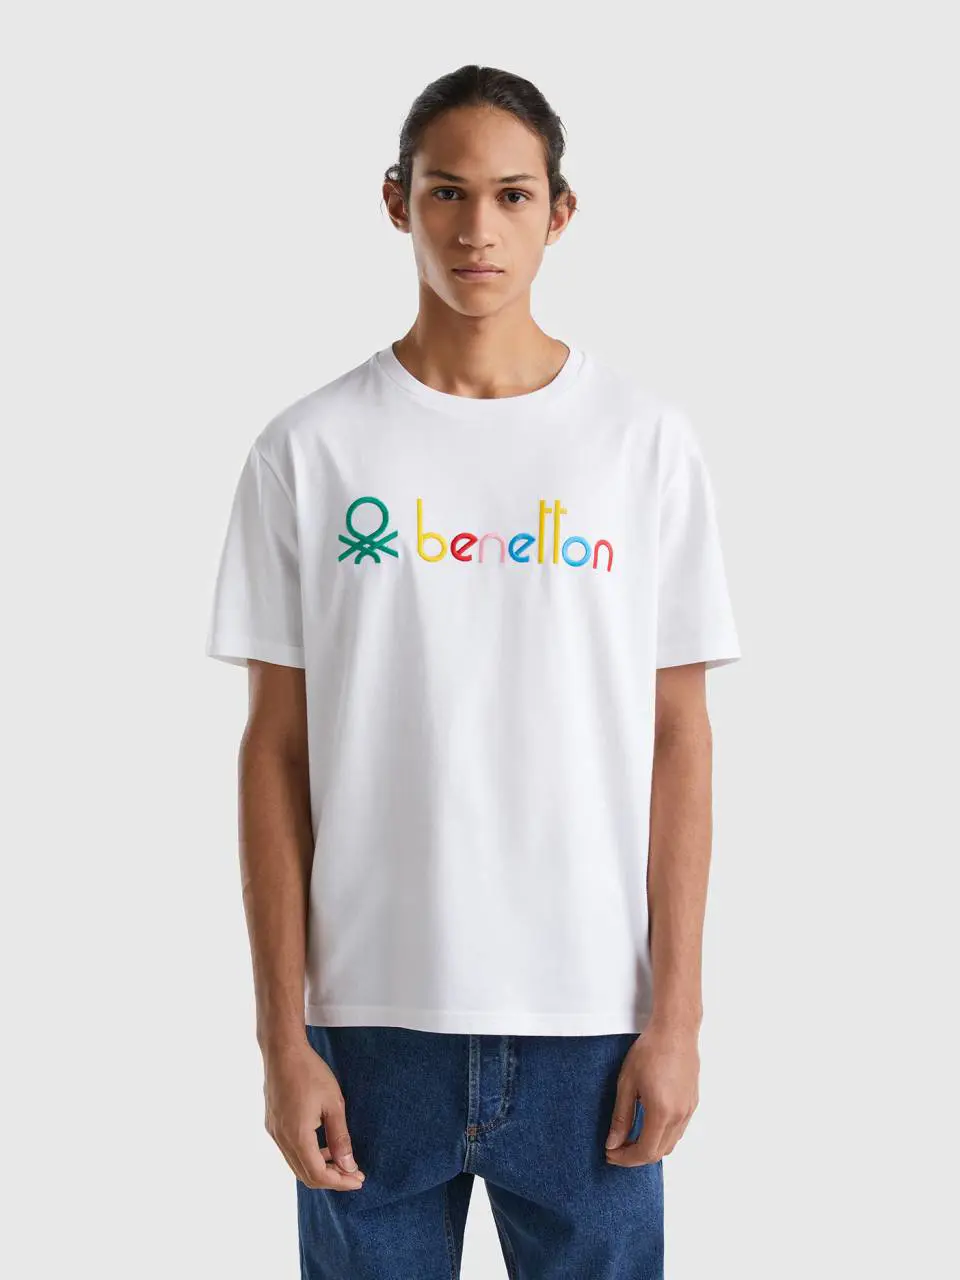 Benetton white t-shirt with multicolored logo. 1